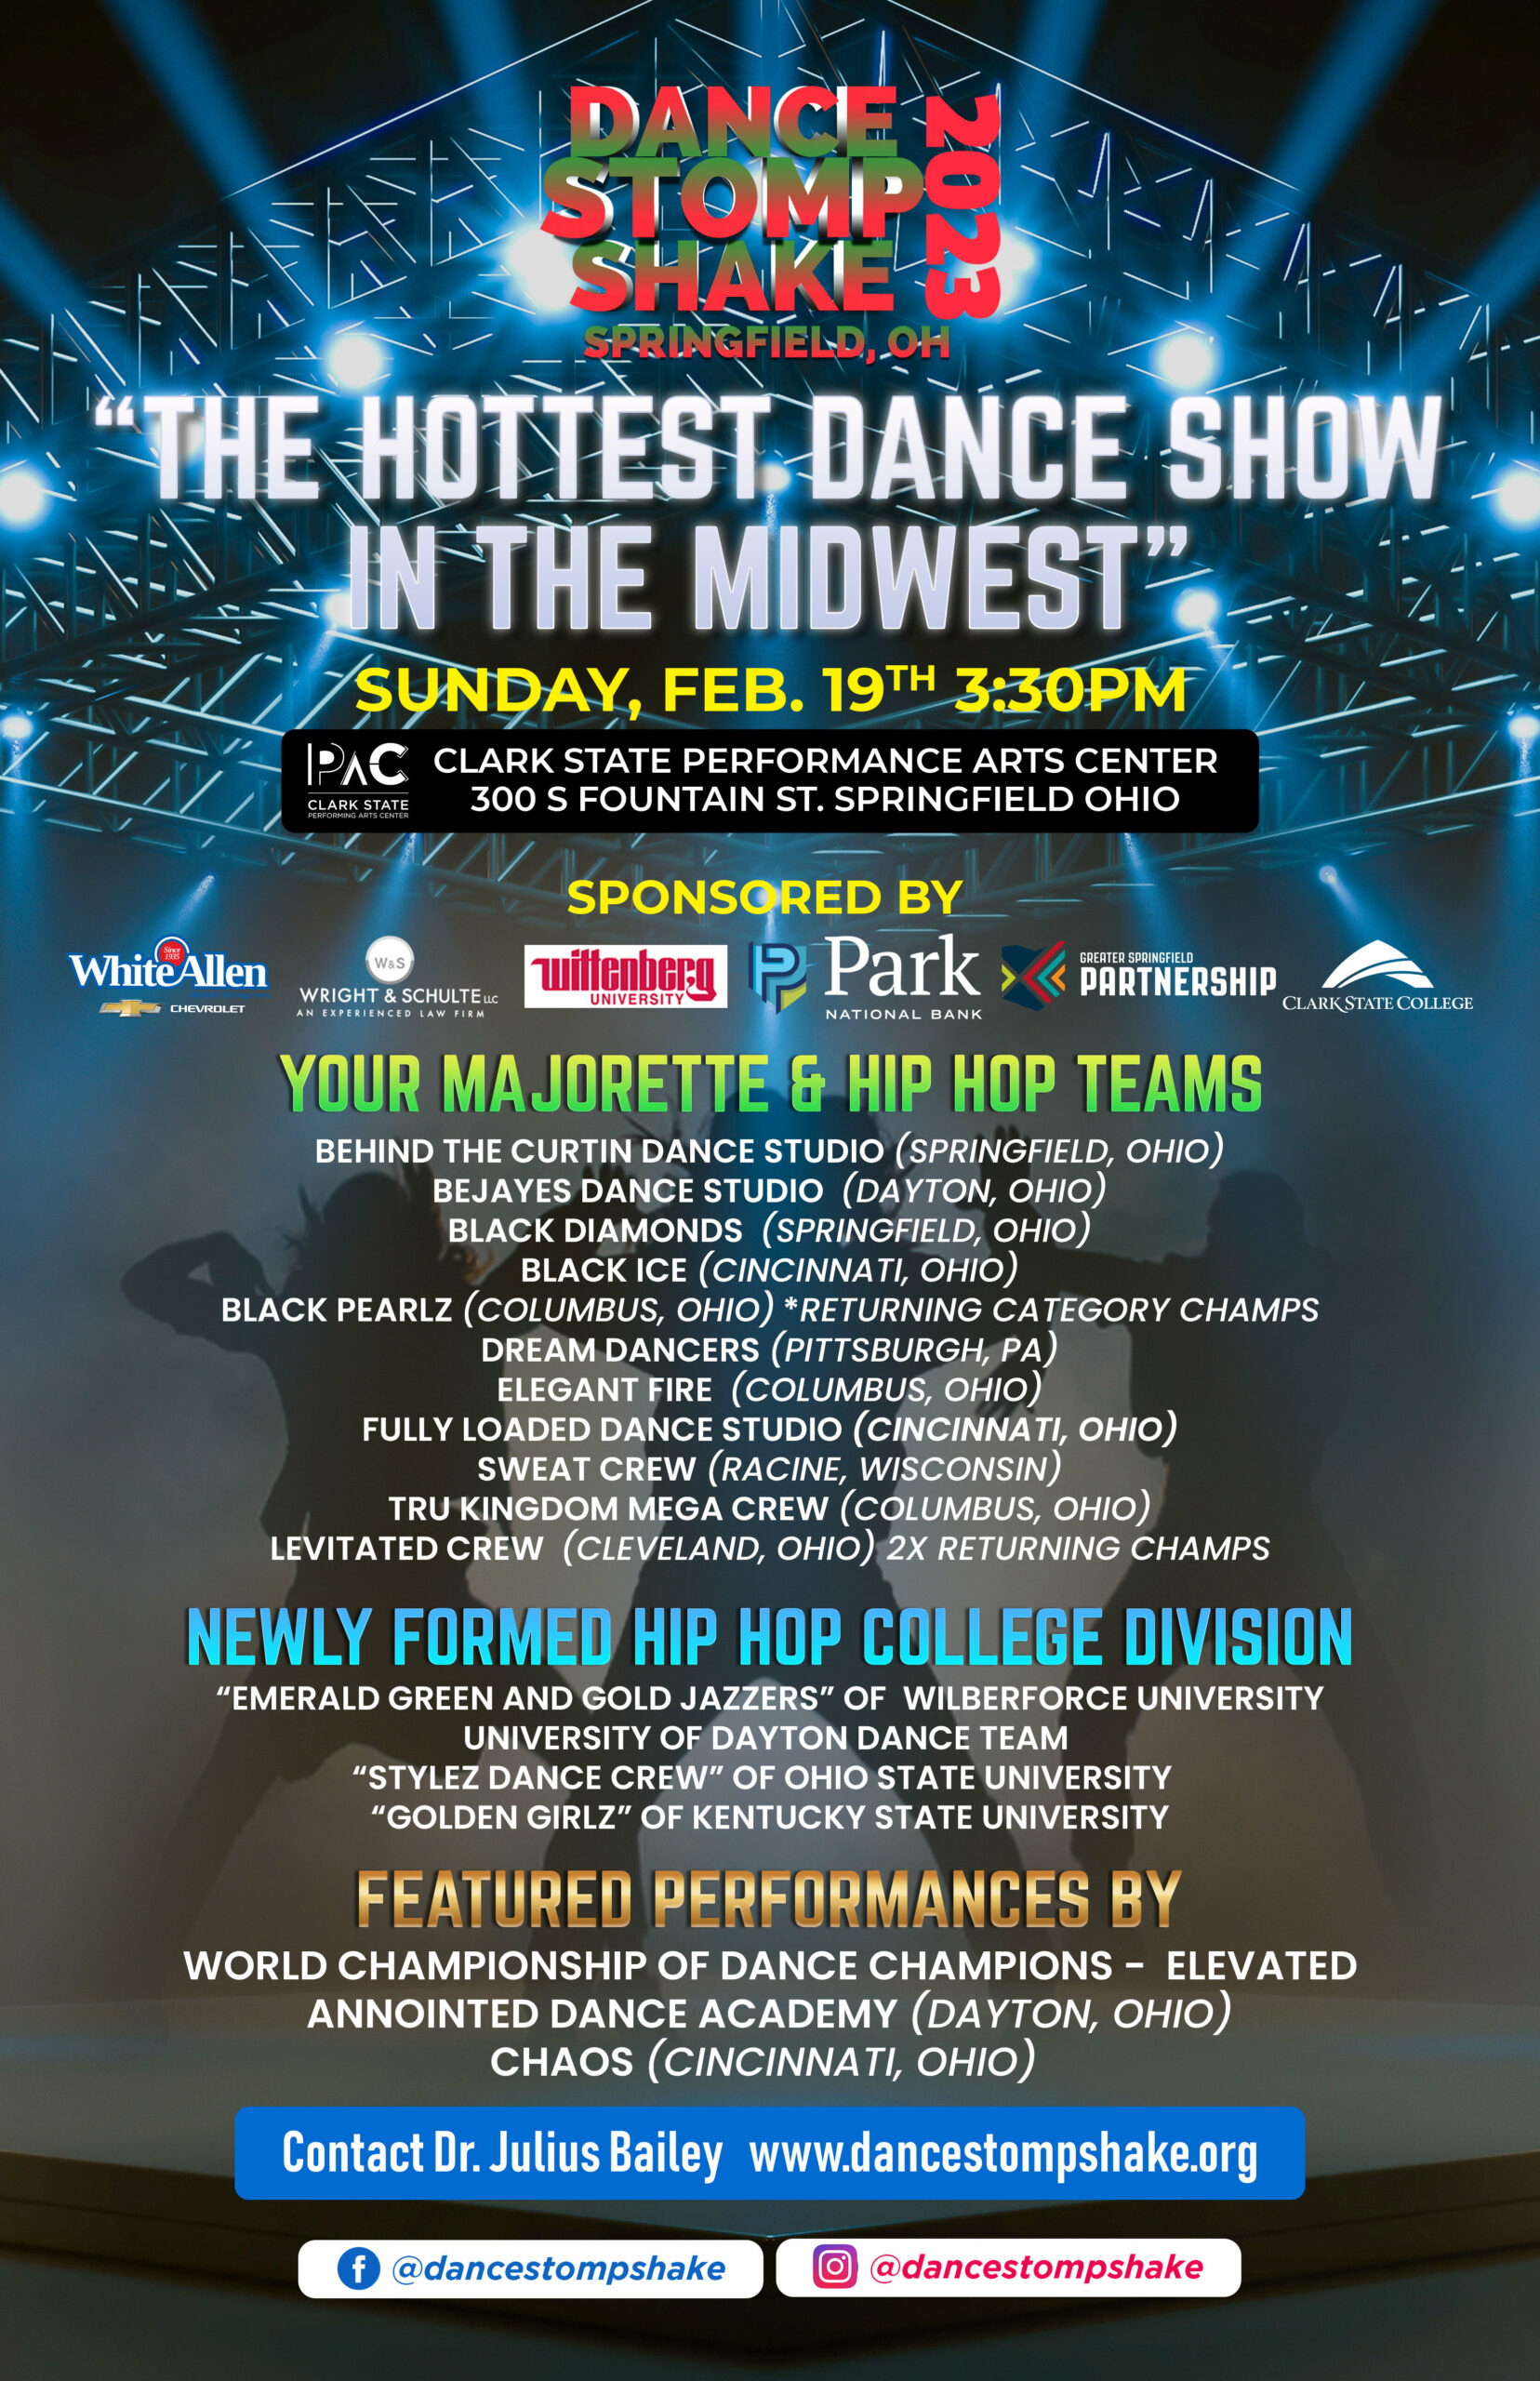 The Hottest Hip Hop Dance Show in the Midwest